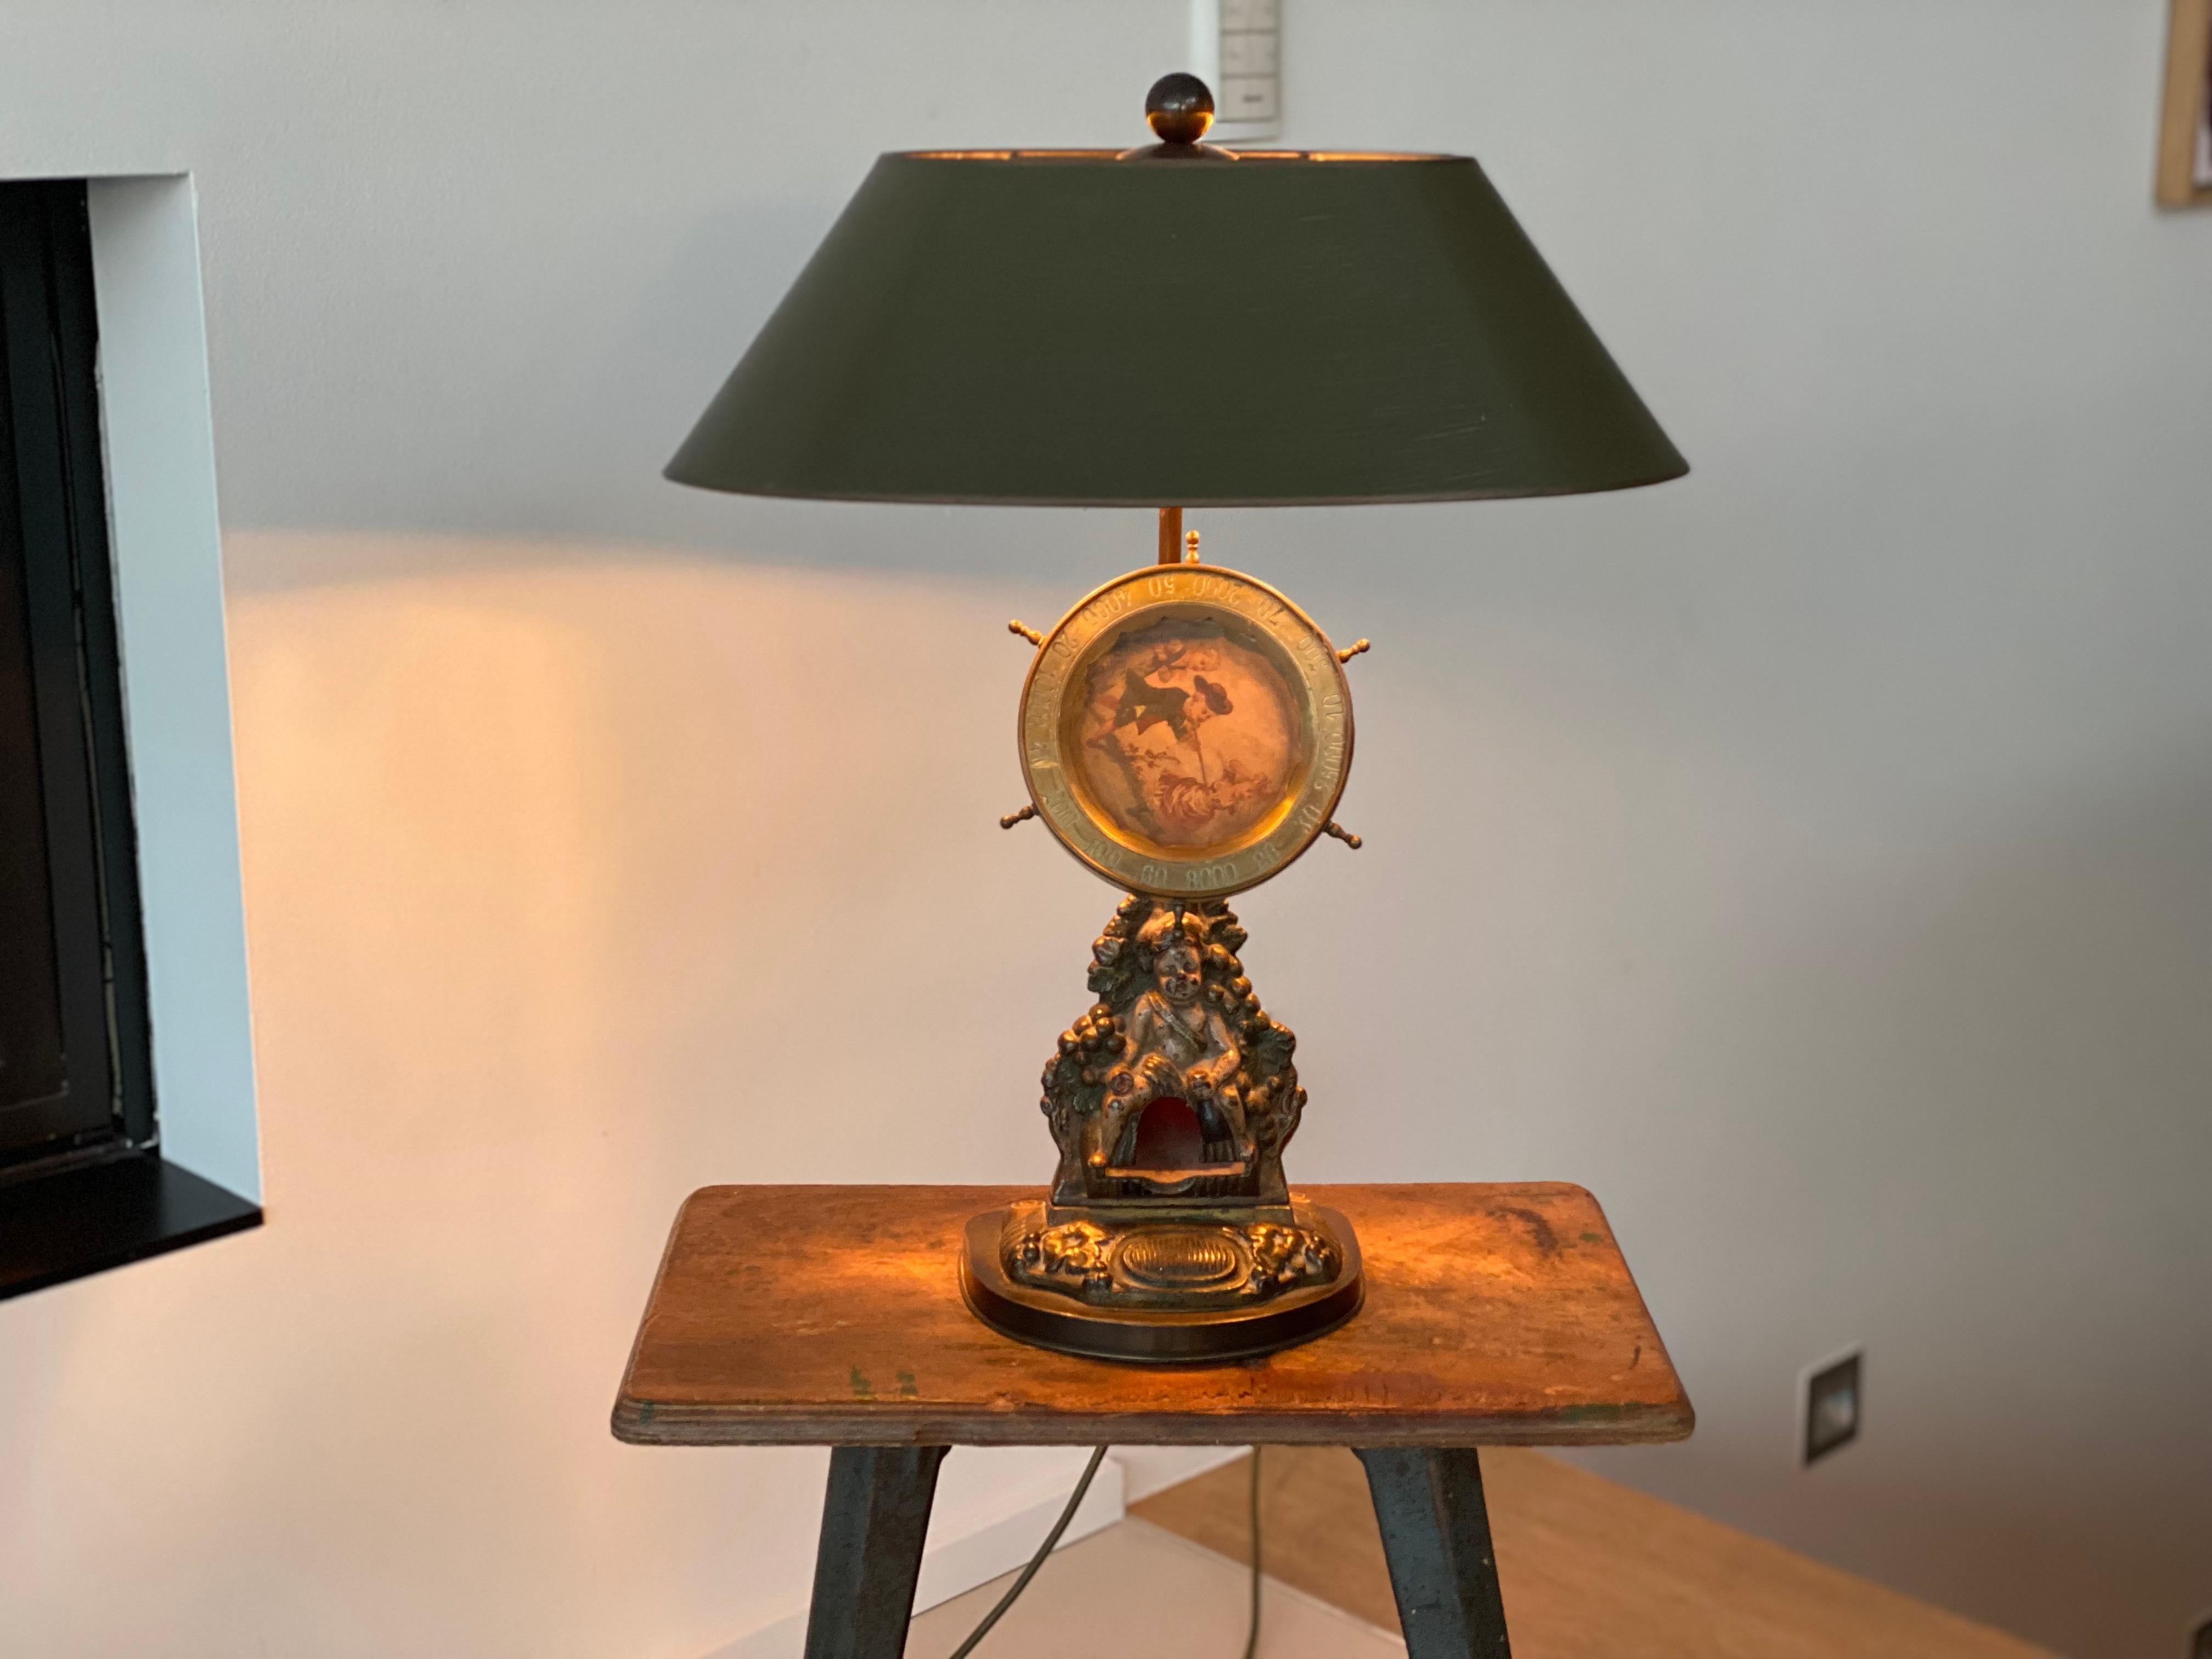 Decorative Table Lamp with Cast-Iron Match Dispenser and Hand-Painted Lampshade 2